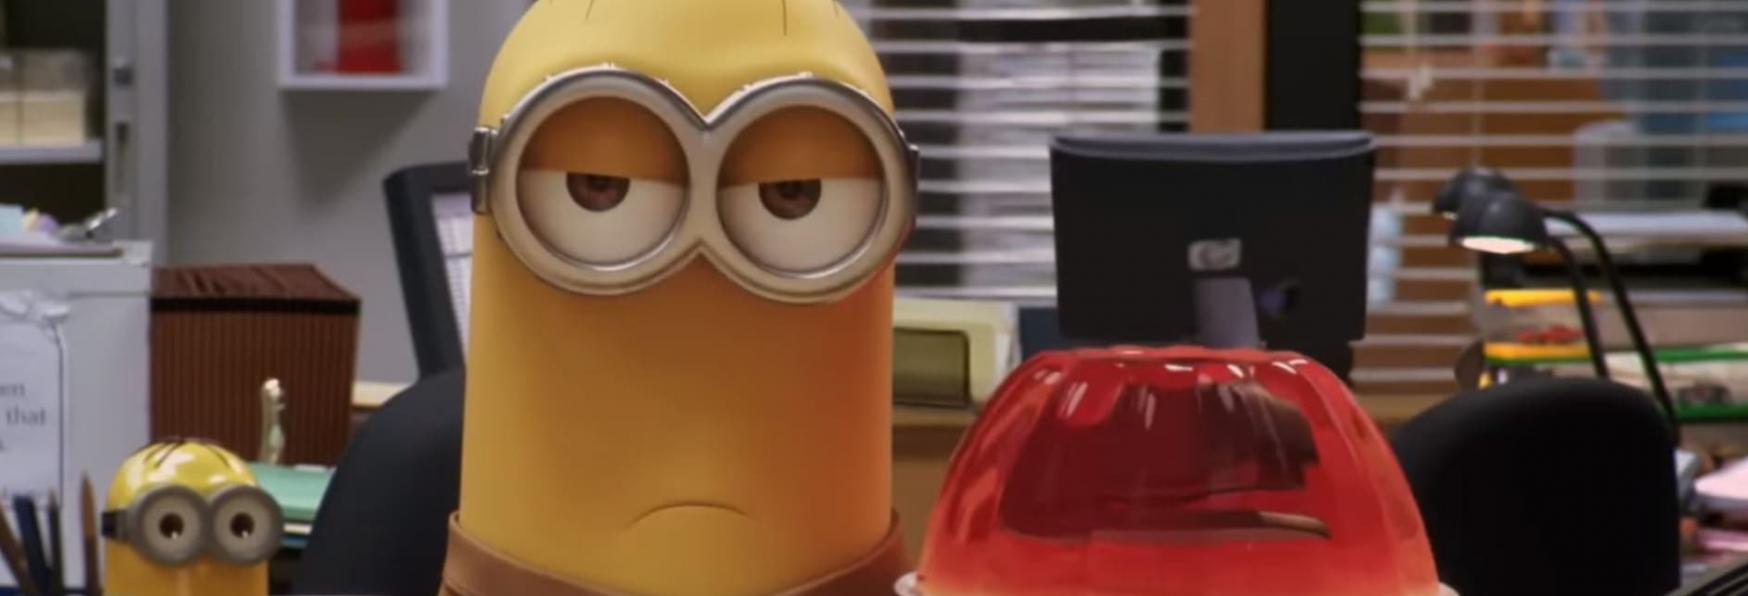 The Office: the intro of the TV series has new protagonists, the Minions!